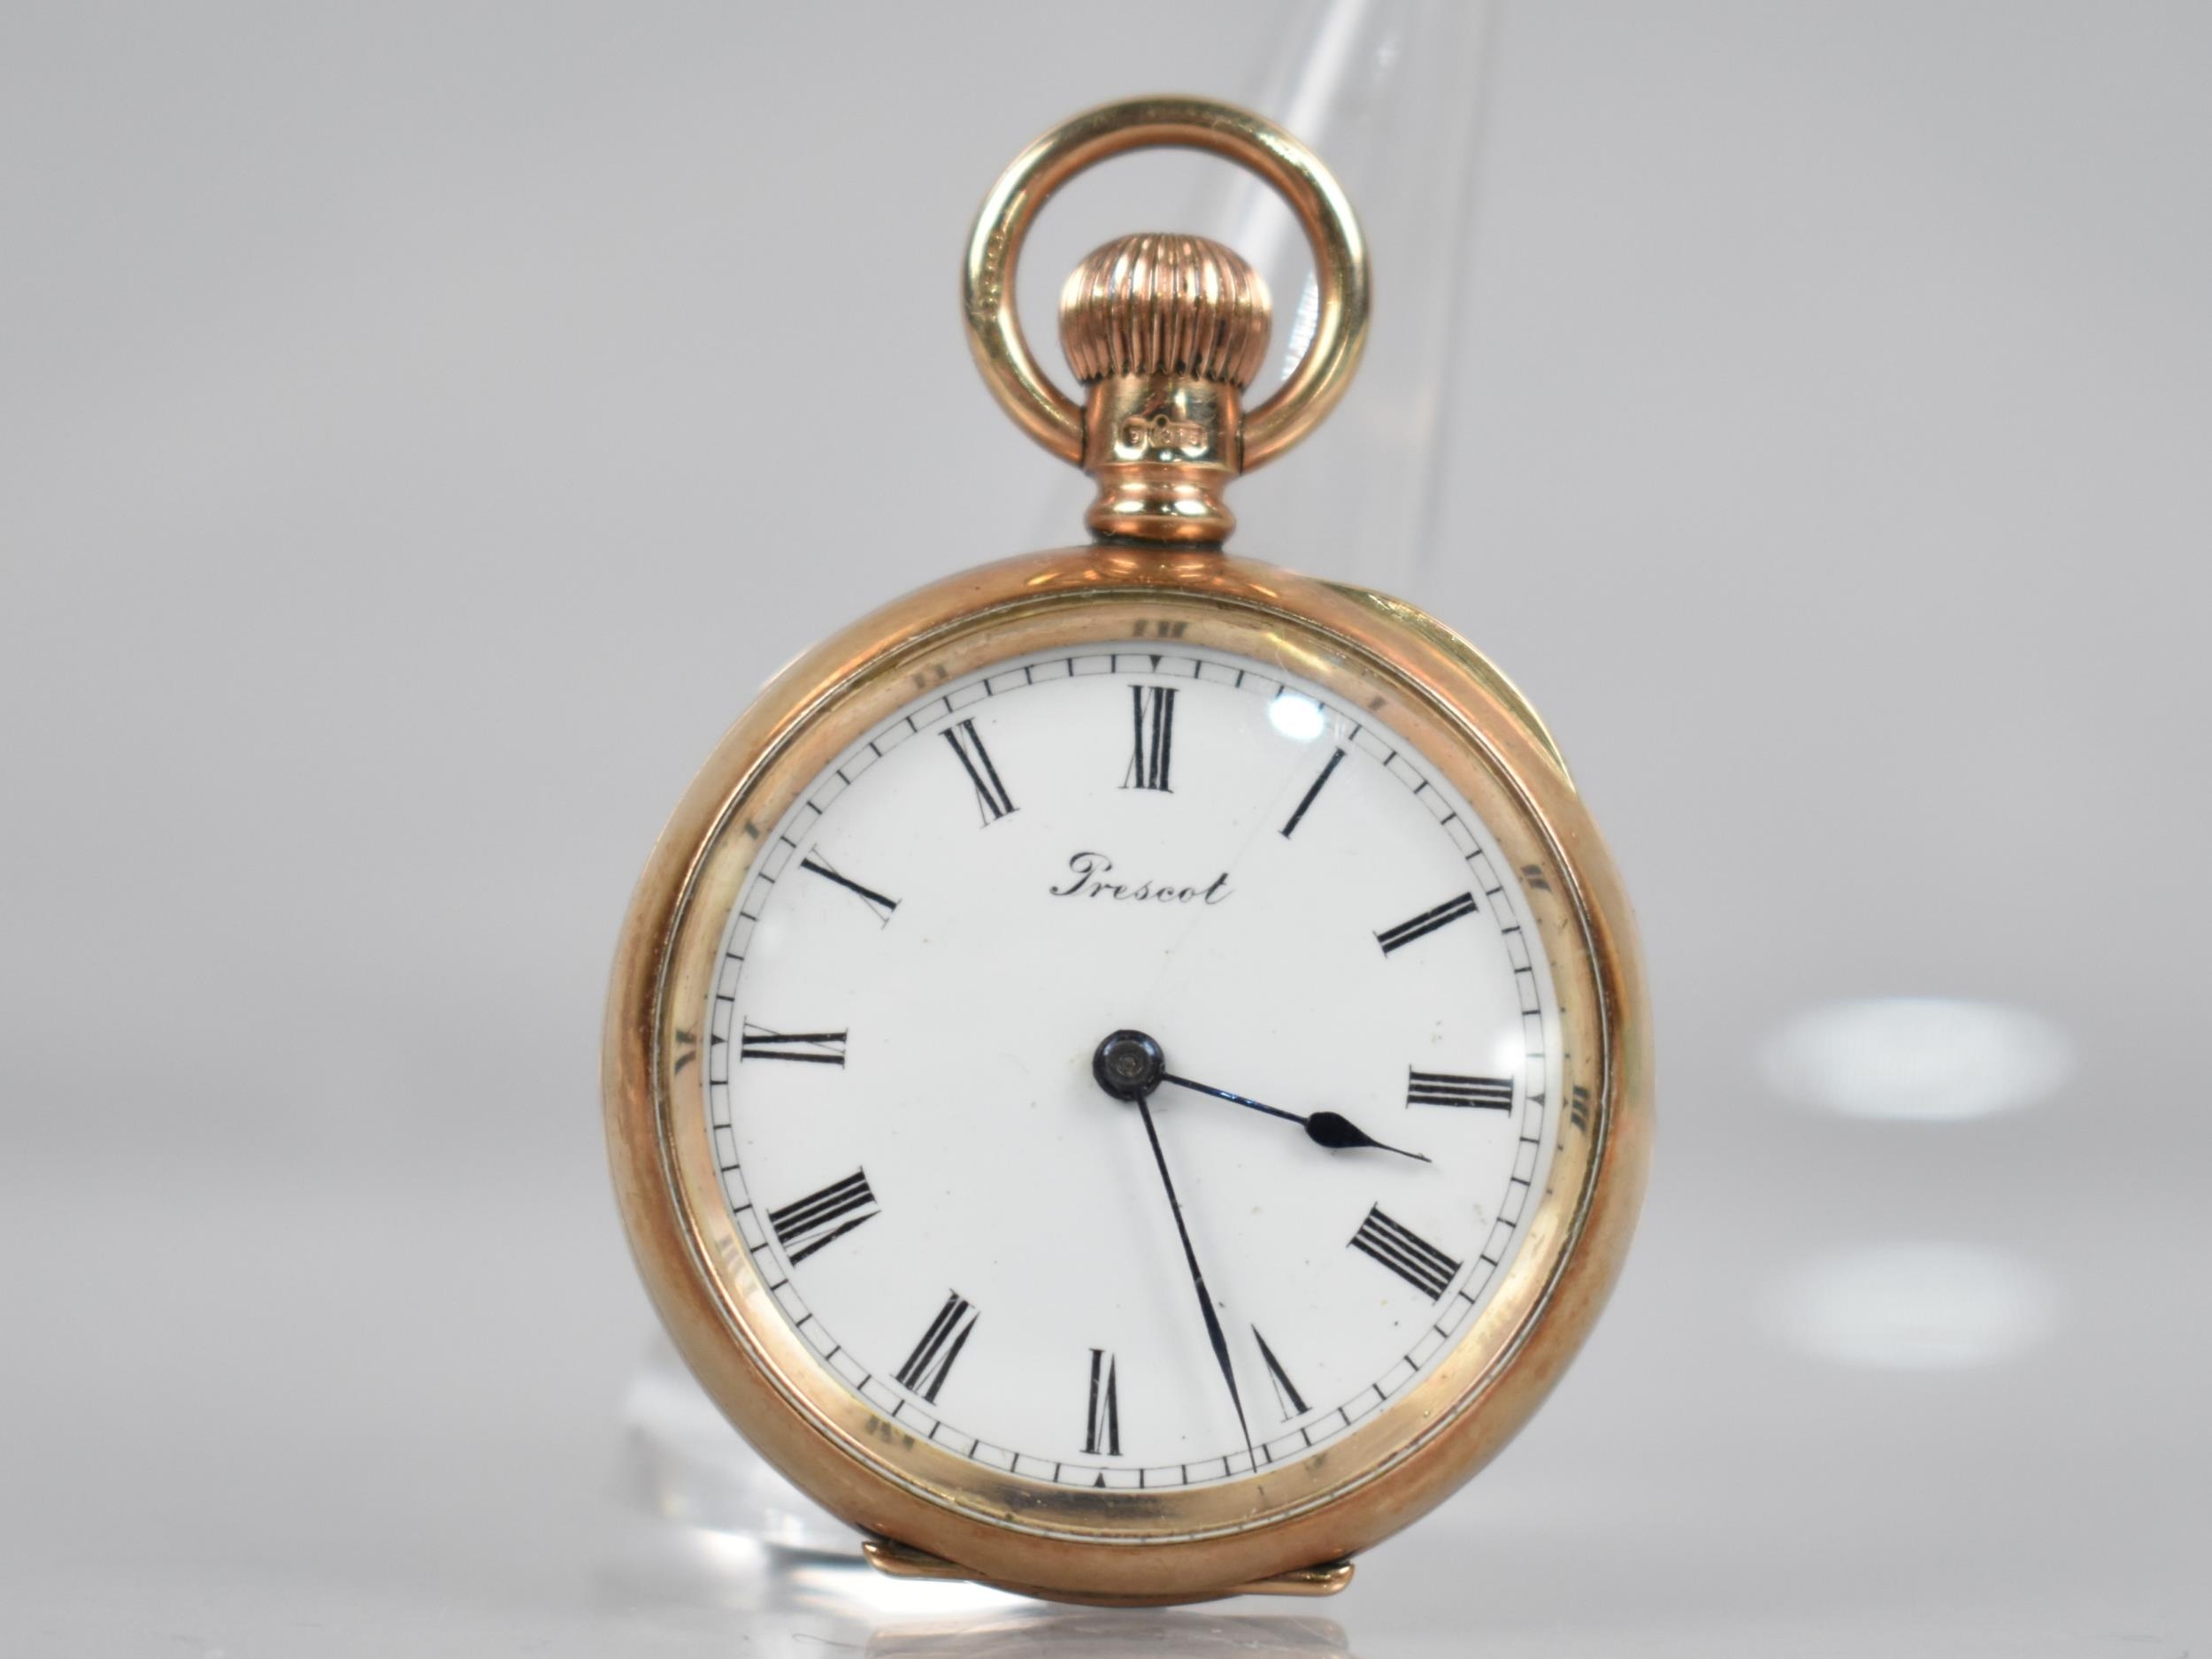 A 9ct Gold Cased Pocket Watch by Prescot, White Enamelled Dial with Roman Numeral Hour Indicators